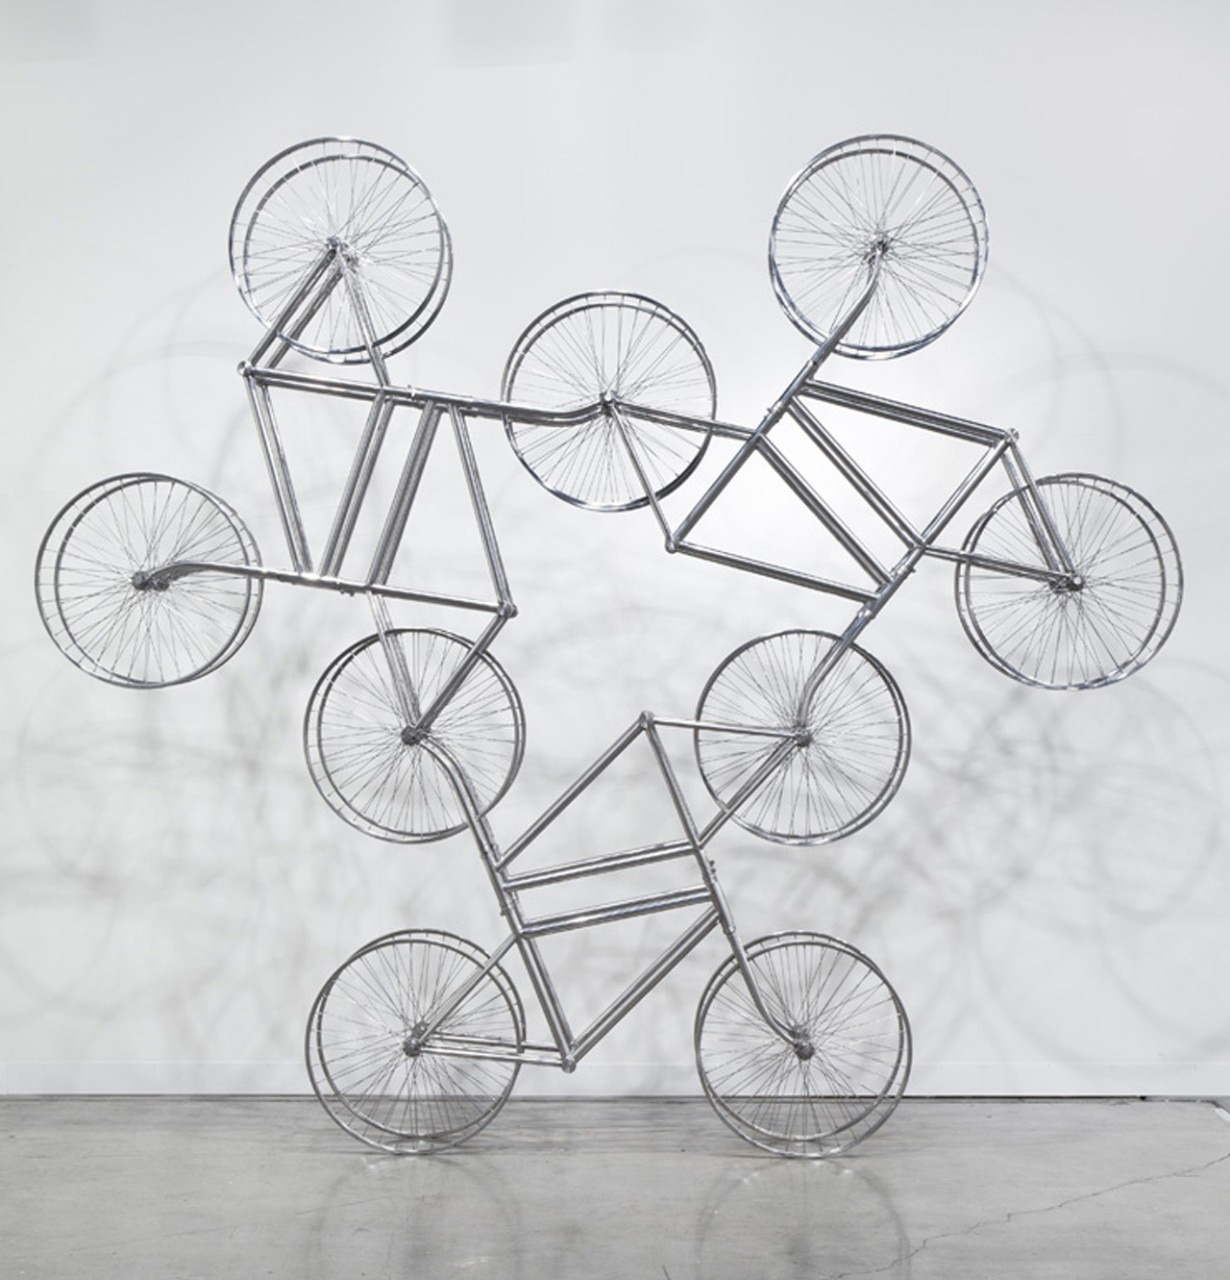 Ai Weiwei, Forever, 2013, stainless steel bicycles in Silvery